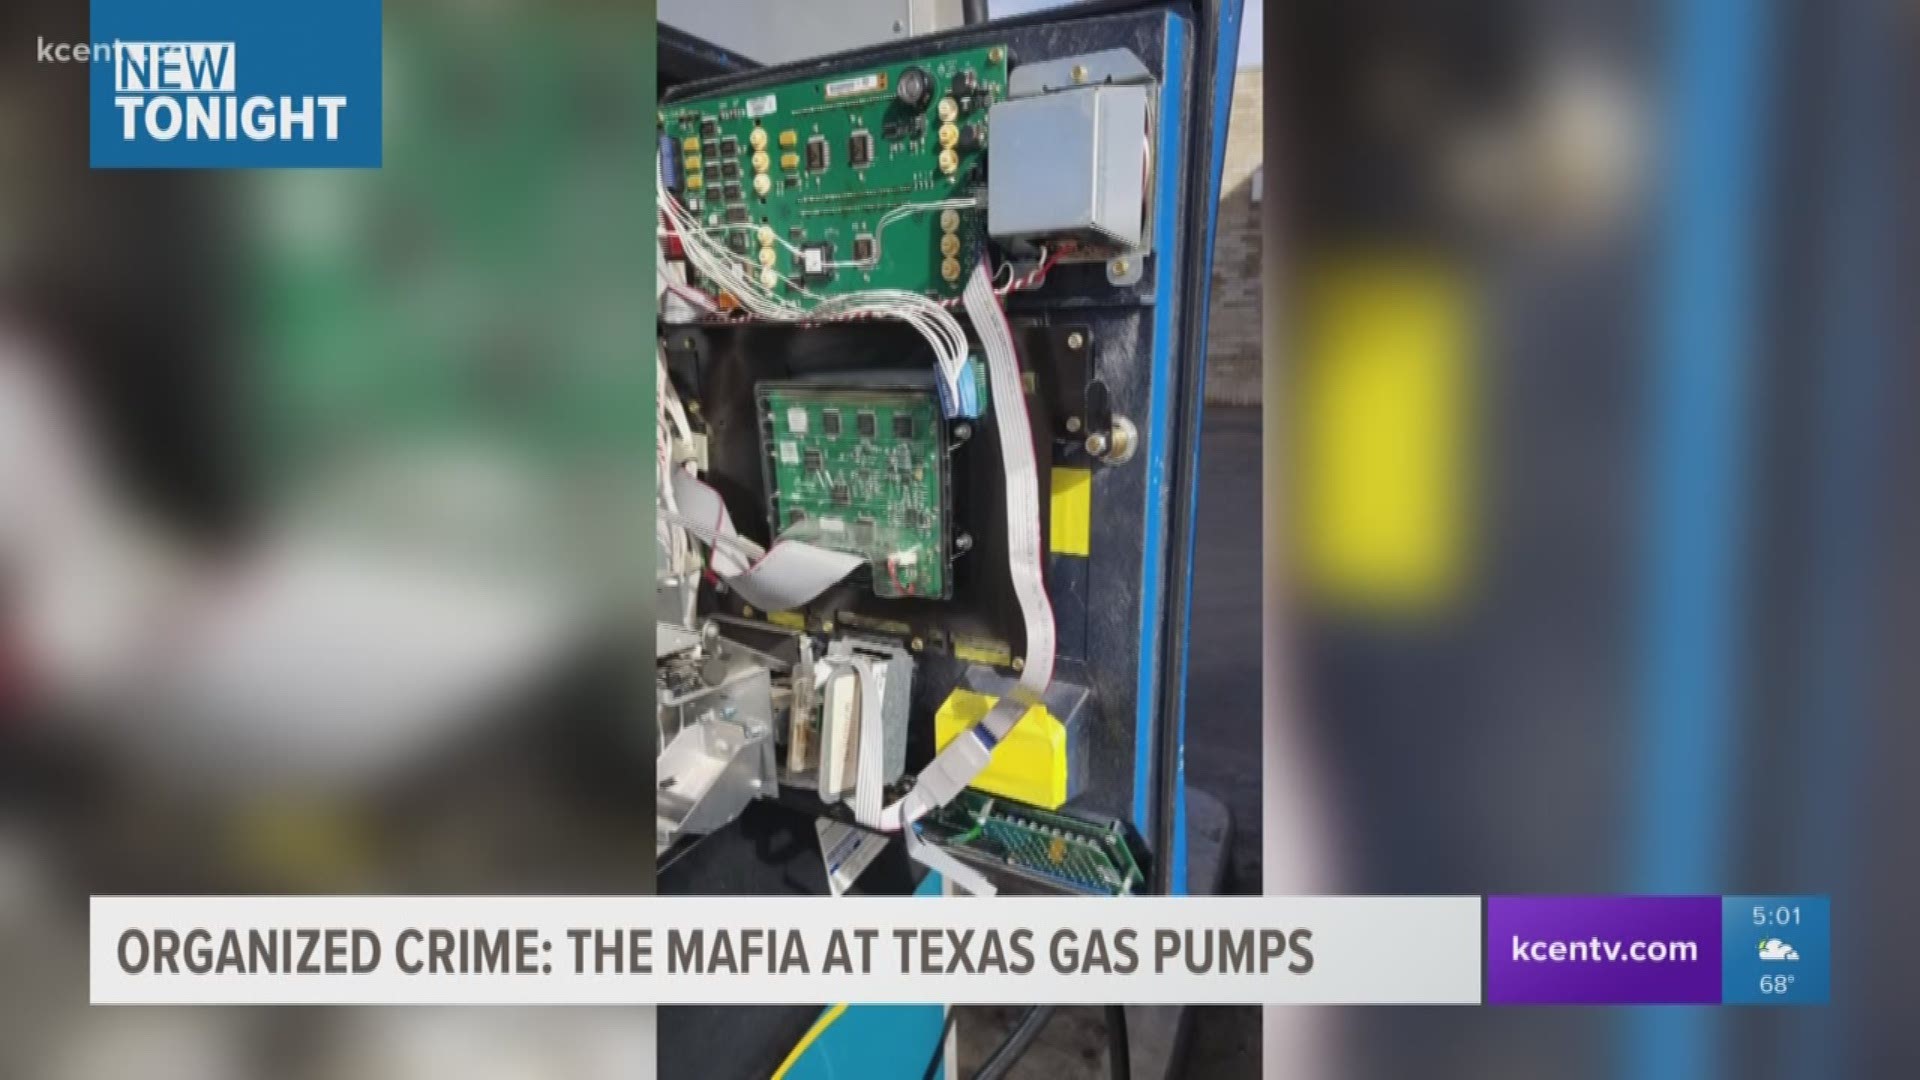 Texas Agriculture Commissioner Sid Miller said the bluetooth skimmer scheme is a part of a statewide organized crime by members of the Cuban and Russian mafia.